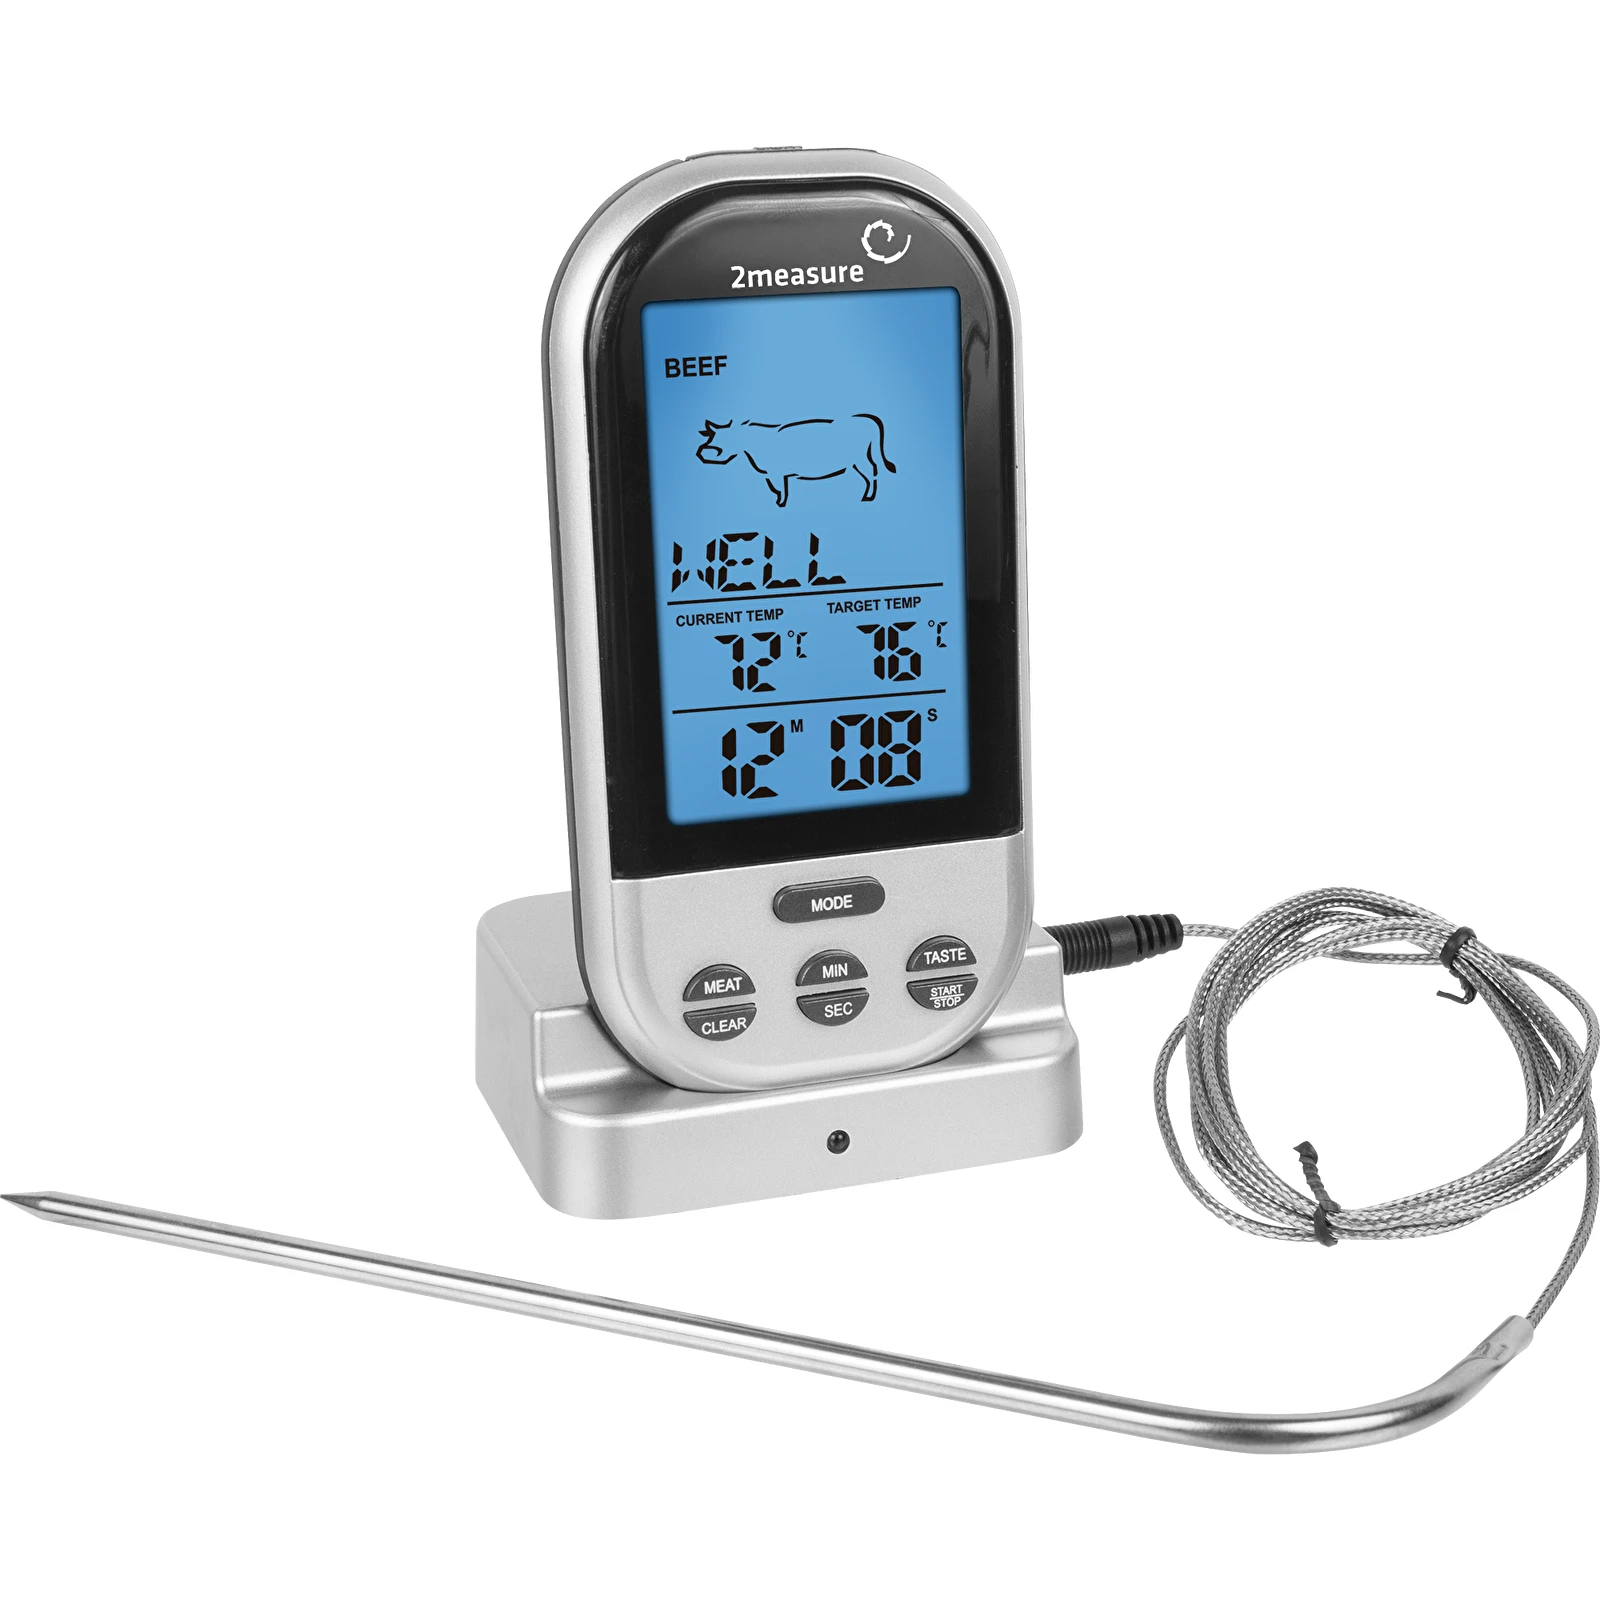 Wireless Thermometers - DER EE